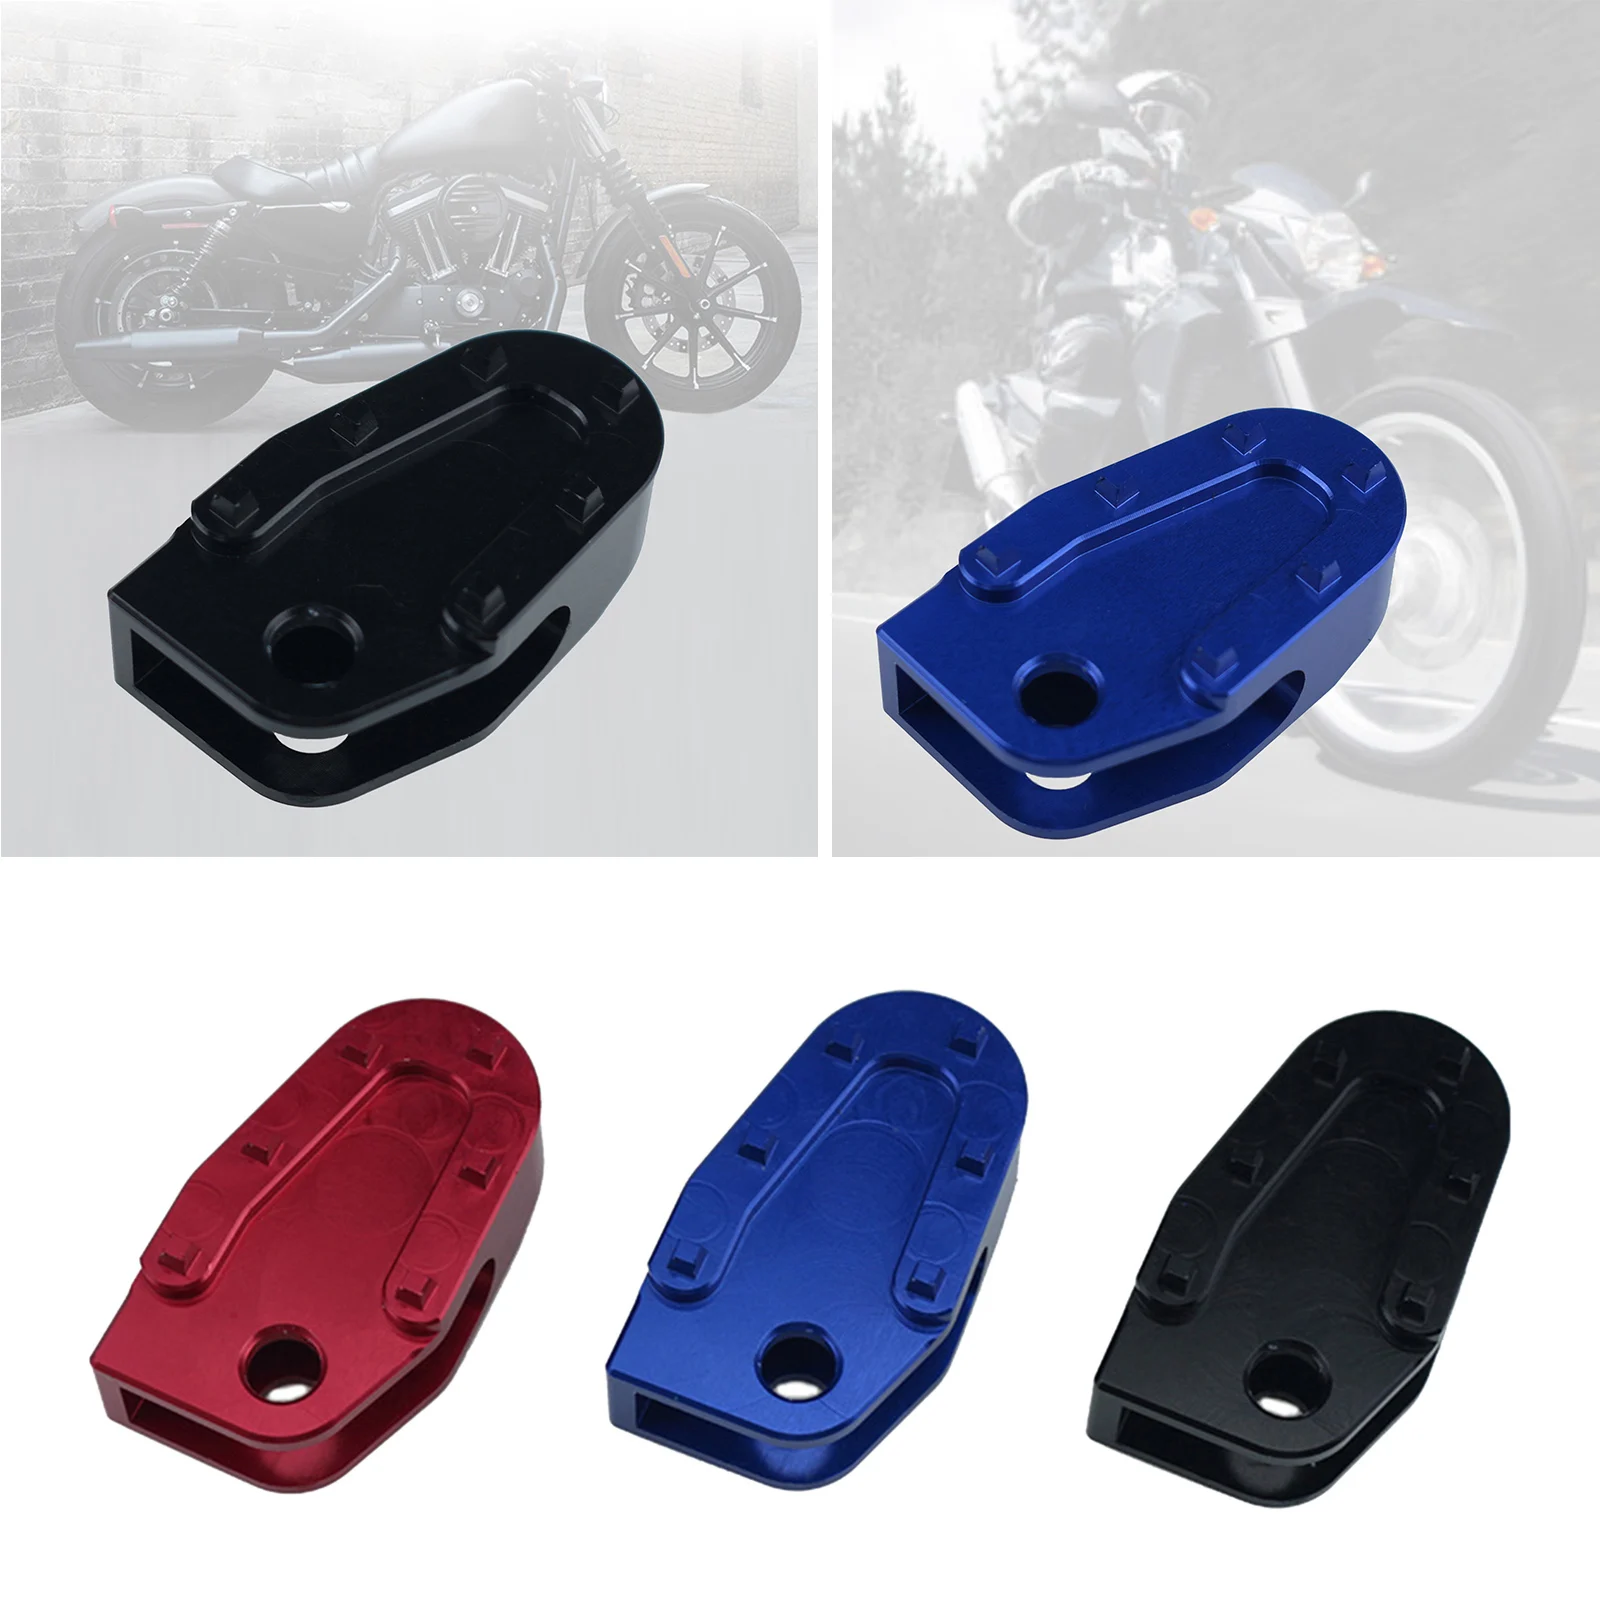 

Widening Expanded Motorcycle Brake Pedal Pad Step Cover Fit for SUZUKI DRZ400S DRZ400E 2000 Non Slip Parts Accessories